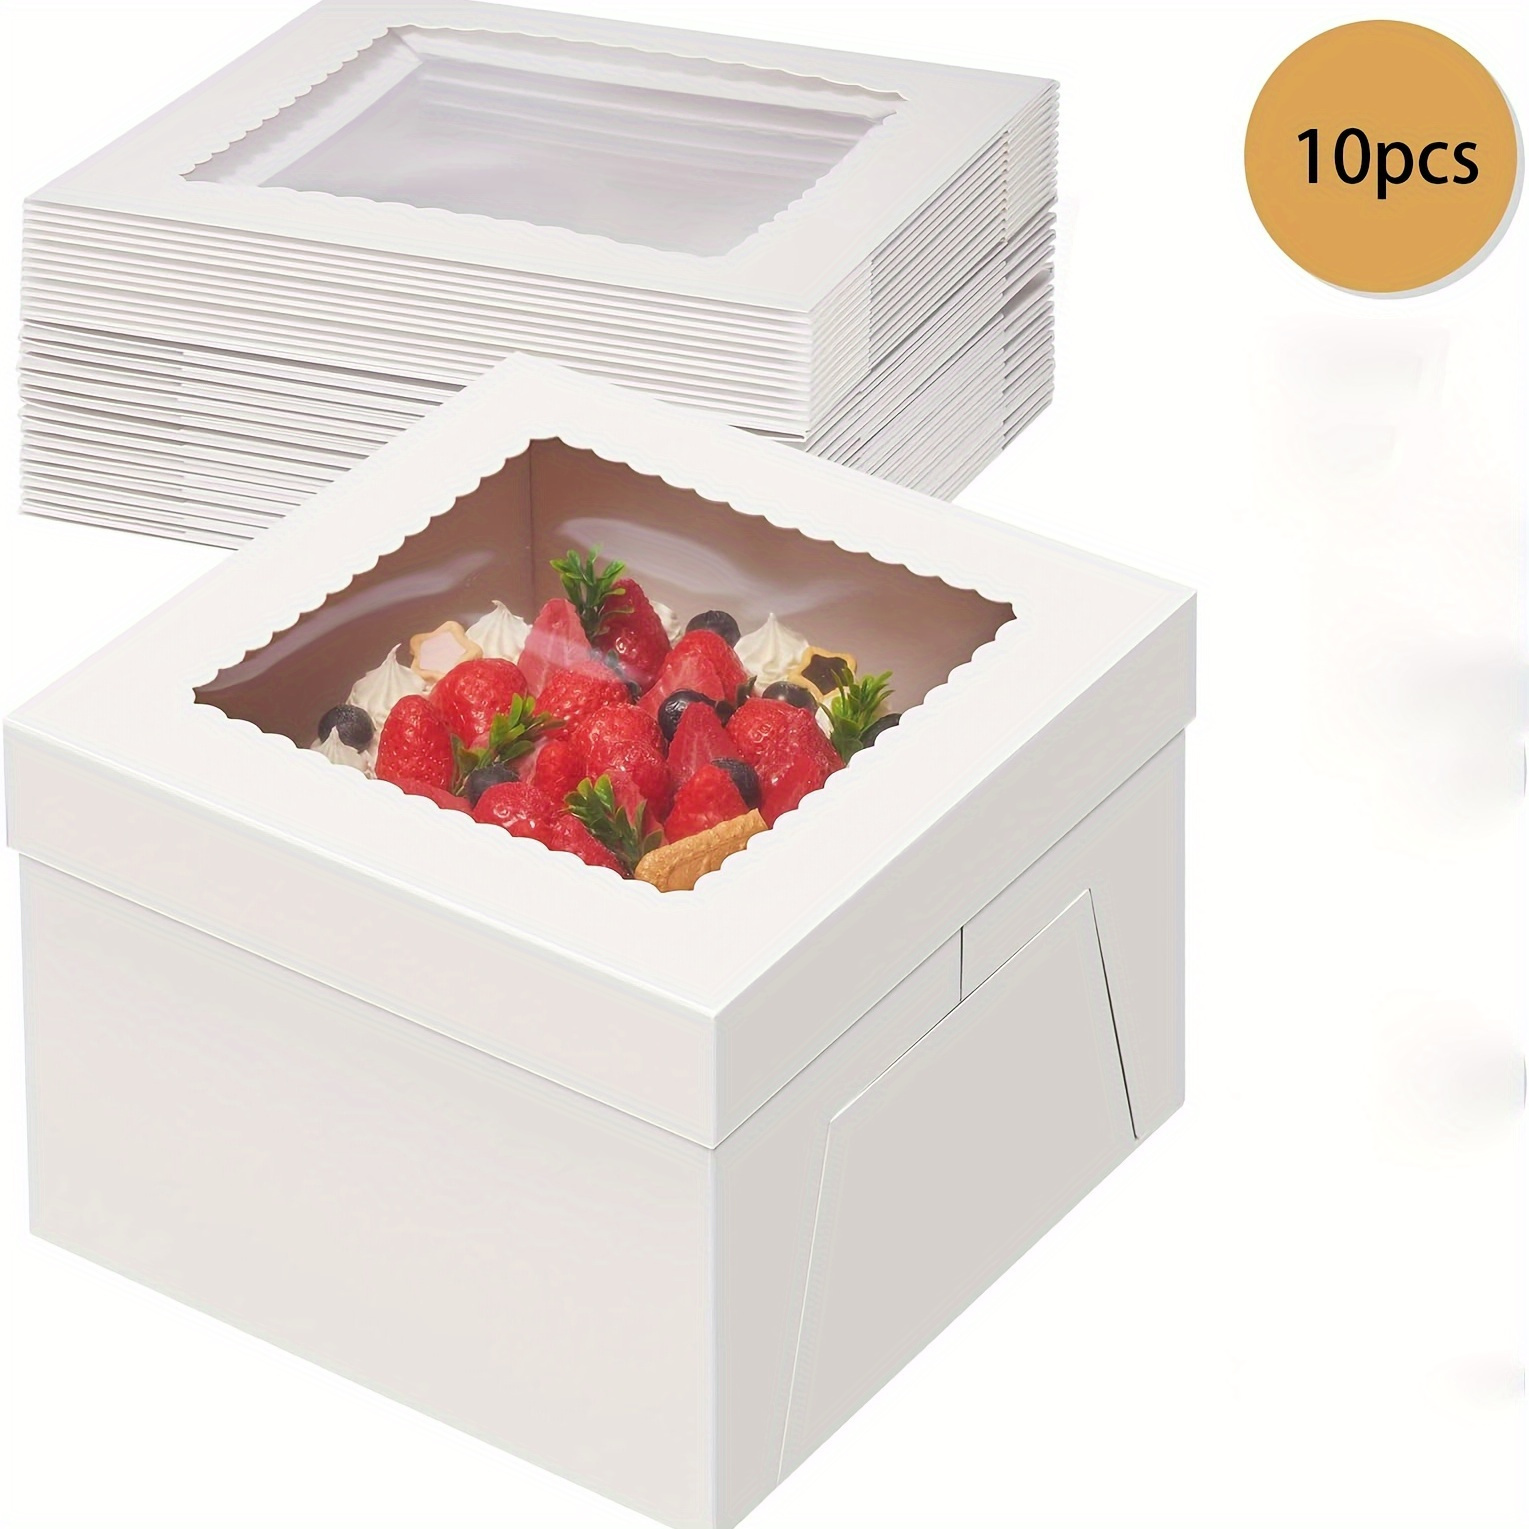 

10pcs, Cake Boxes, Tall Cake Box With Window, White Bakery Boxes, Large Baking Boxes, Square Cardboard Cake Box For Multi-layer Cakes, Pie, Pastries, Cake Decorating Supplies